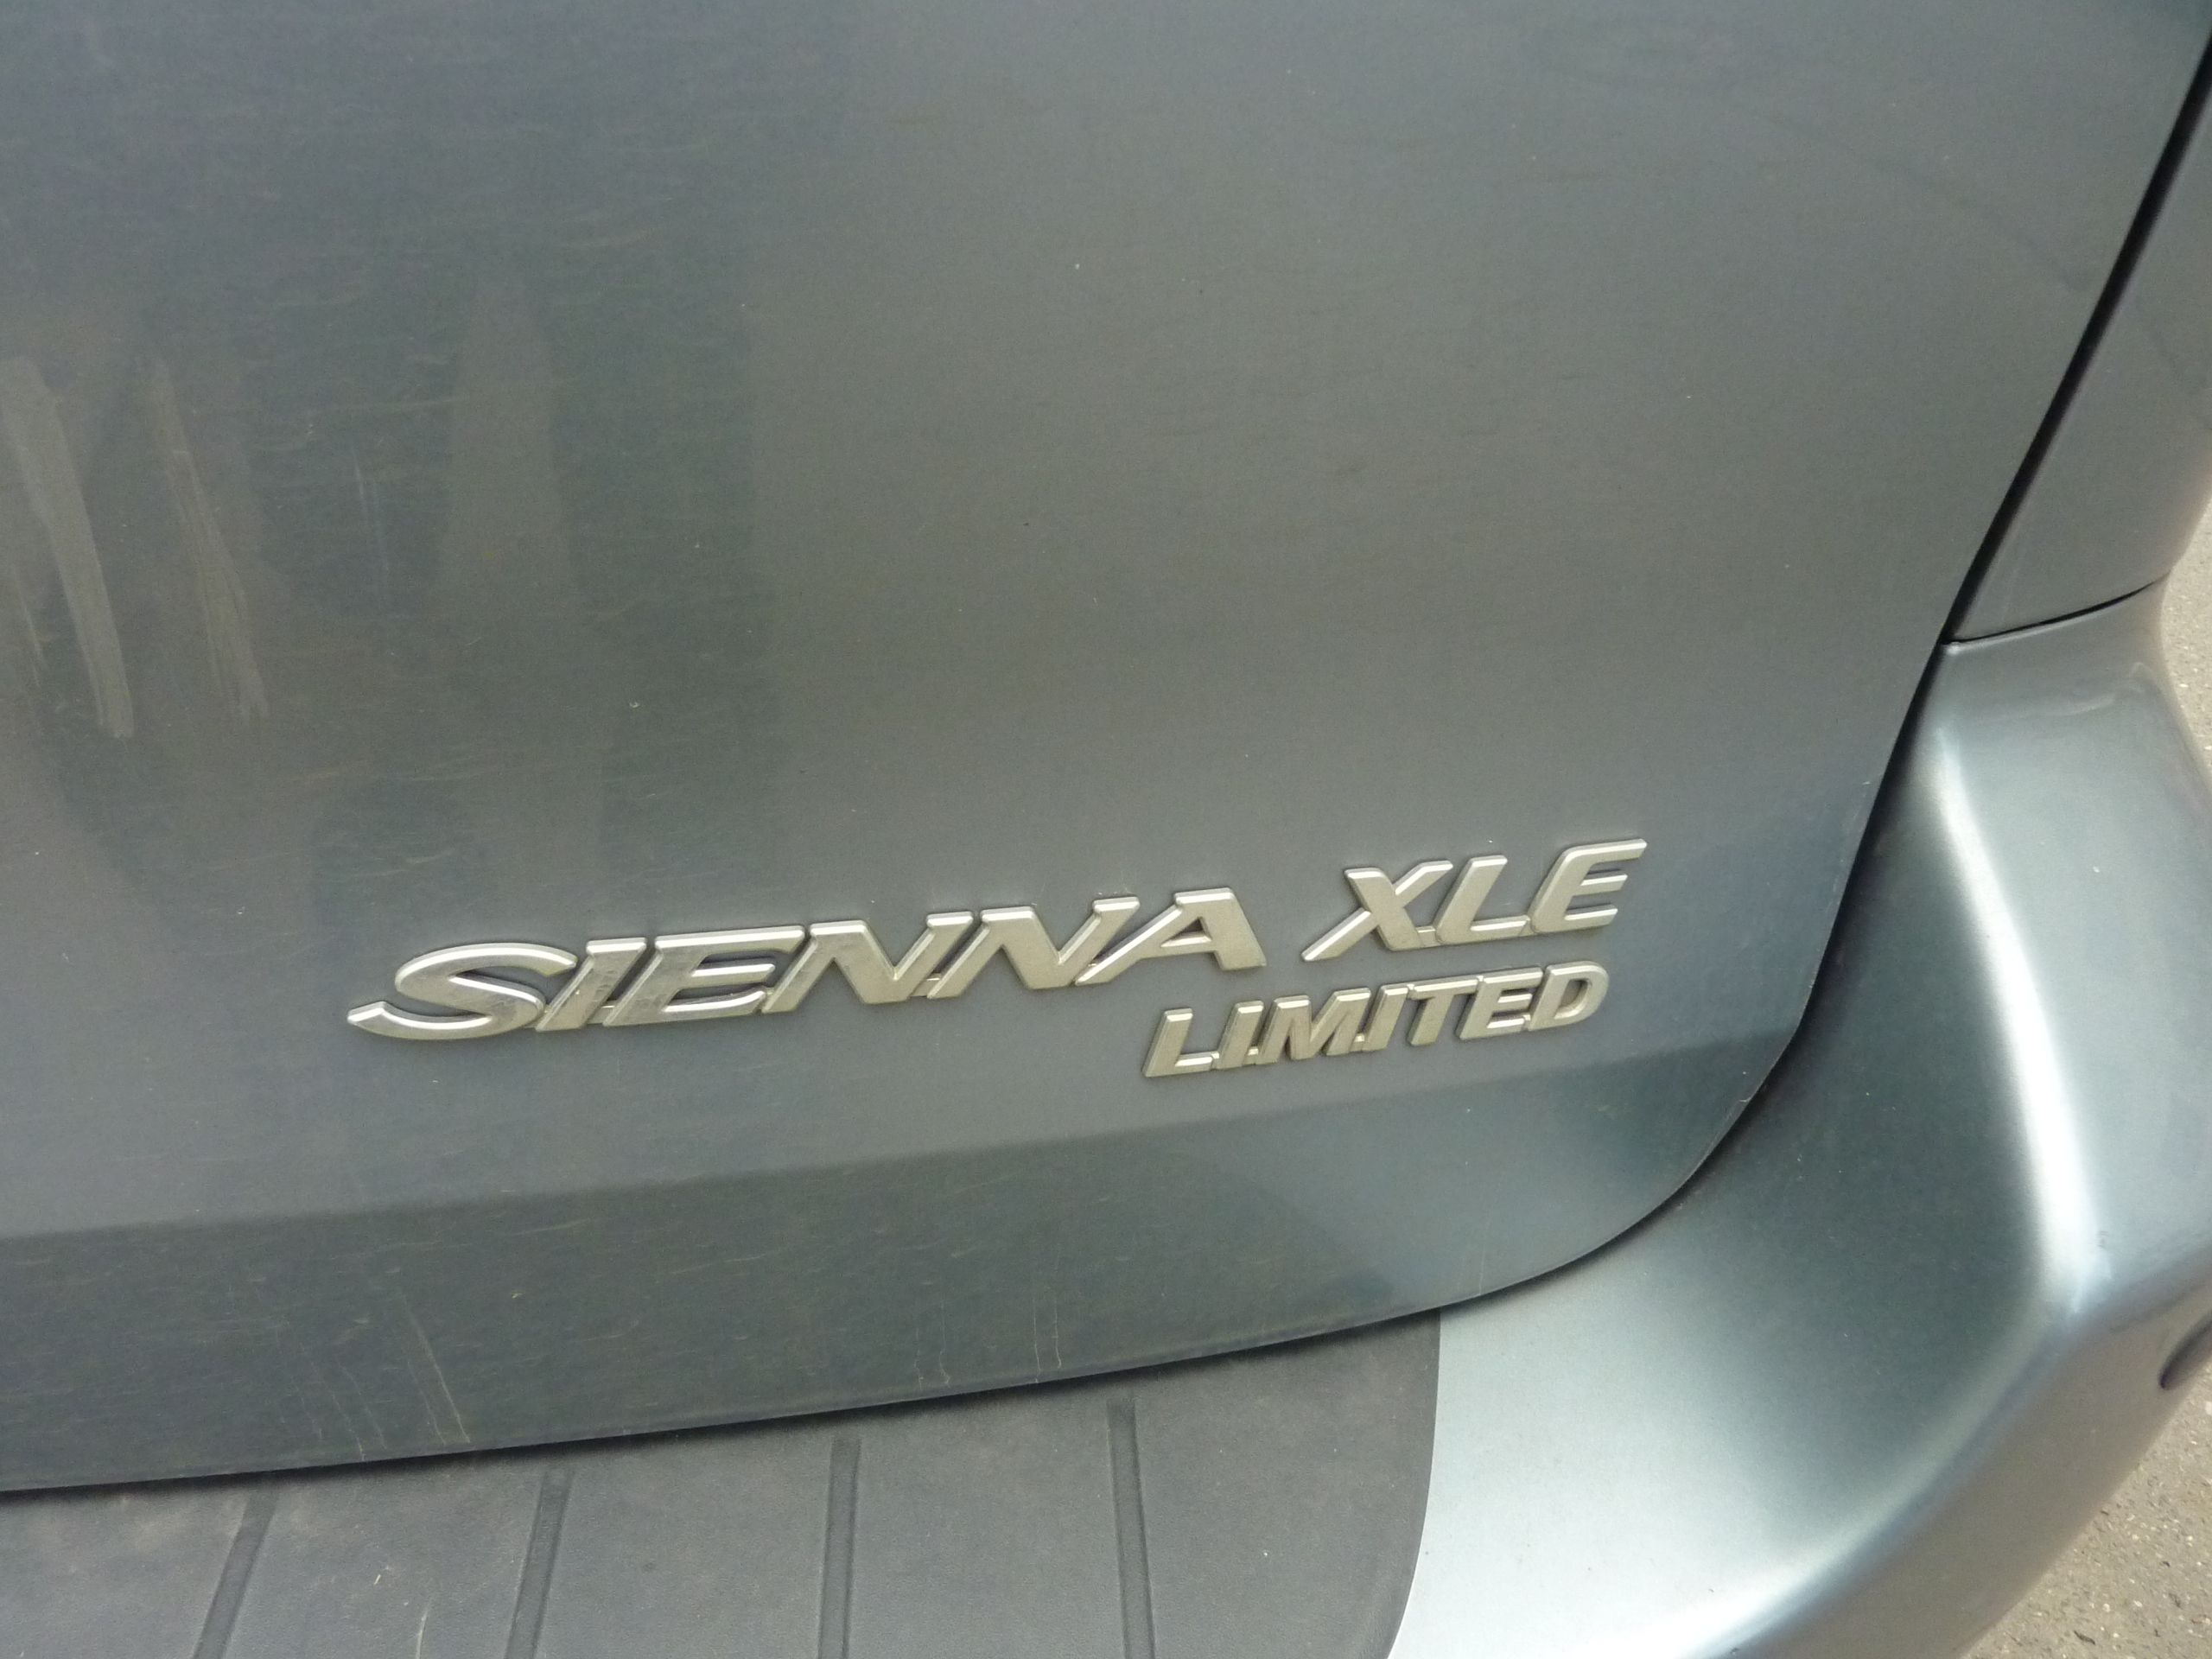 Toyota Sienna X.LE Limited 